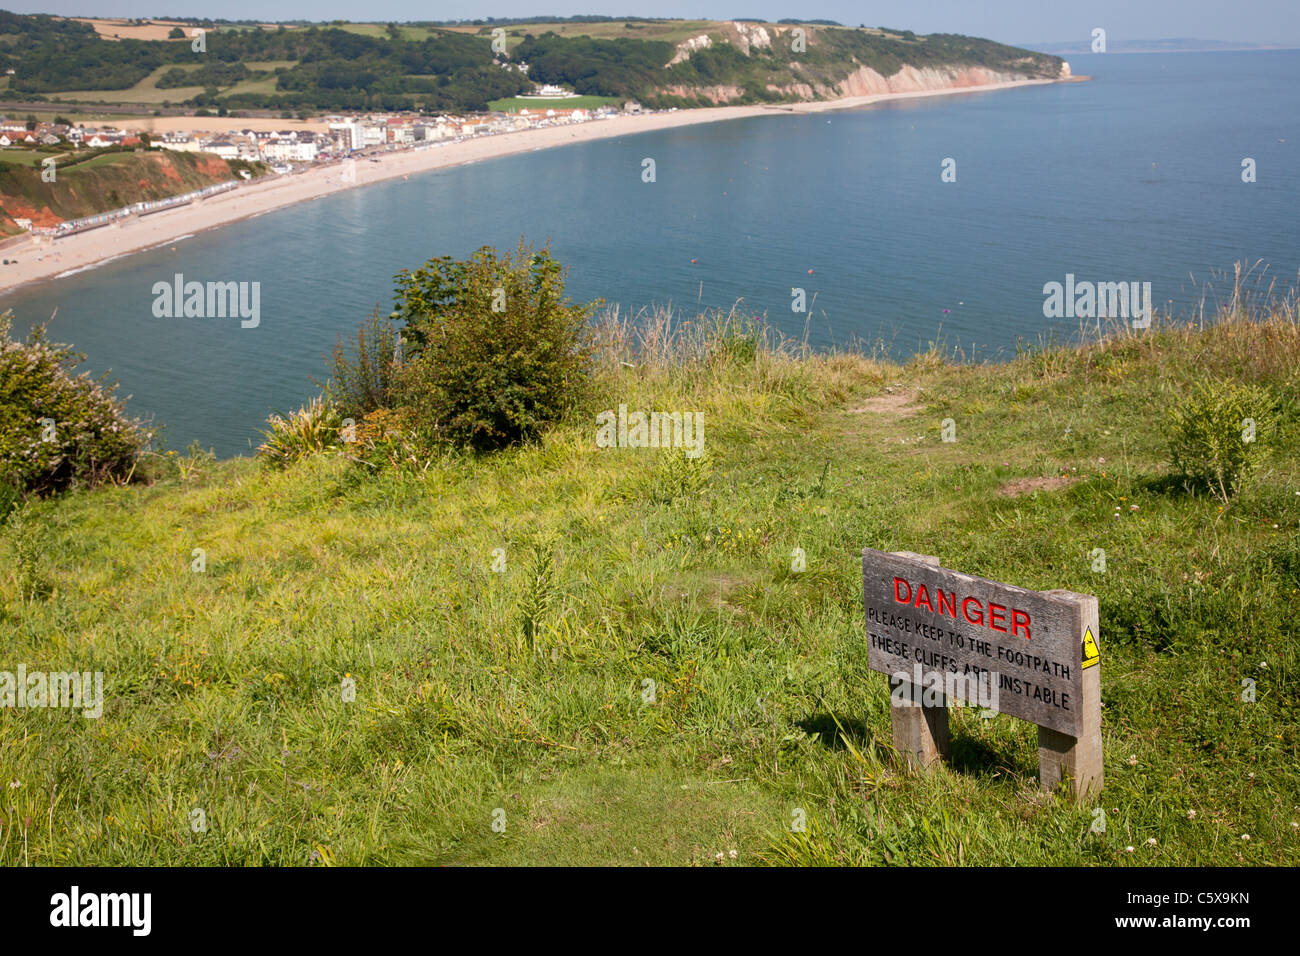 Warning sign for unstable cliffs on clifftop, Seaton, Devon Stock Photo